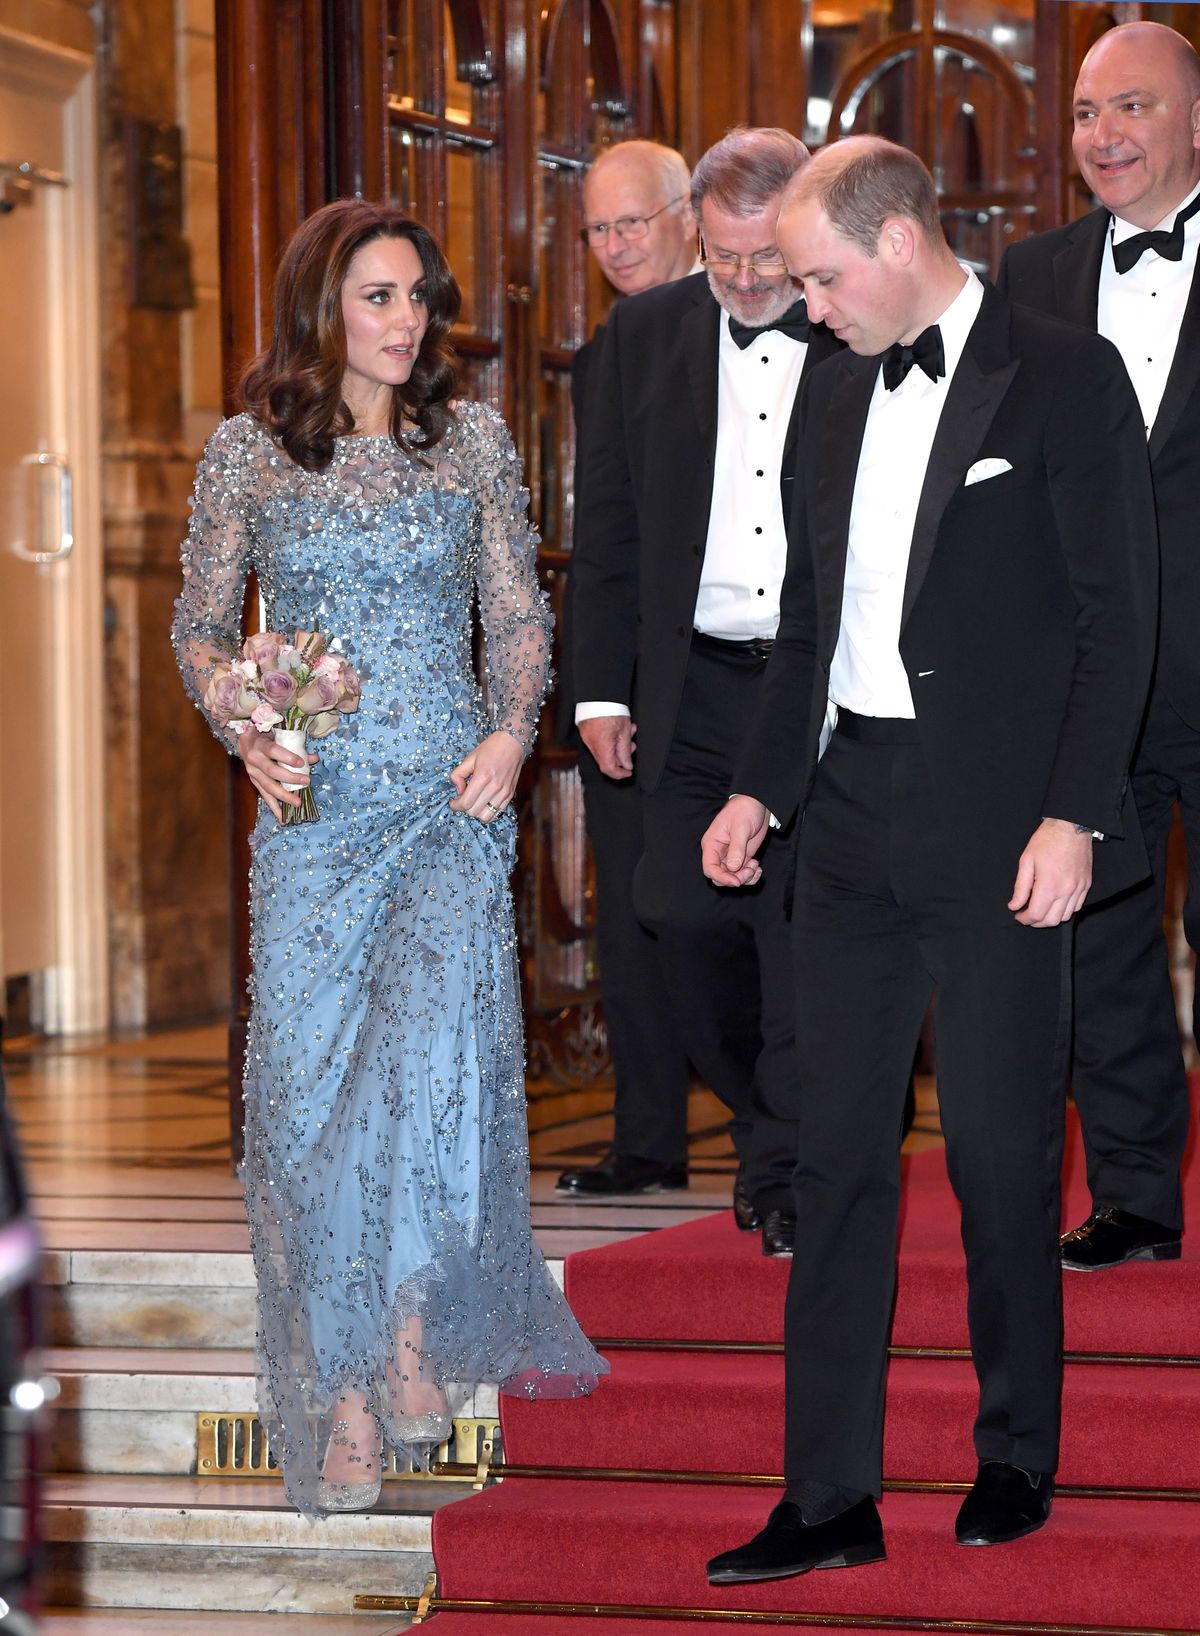 The Duke & Duchess Of Cambridge Attend The Royal Variety Performance